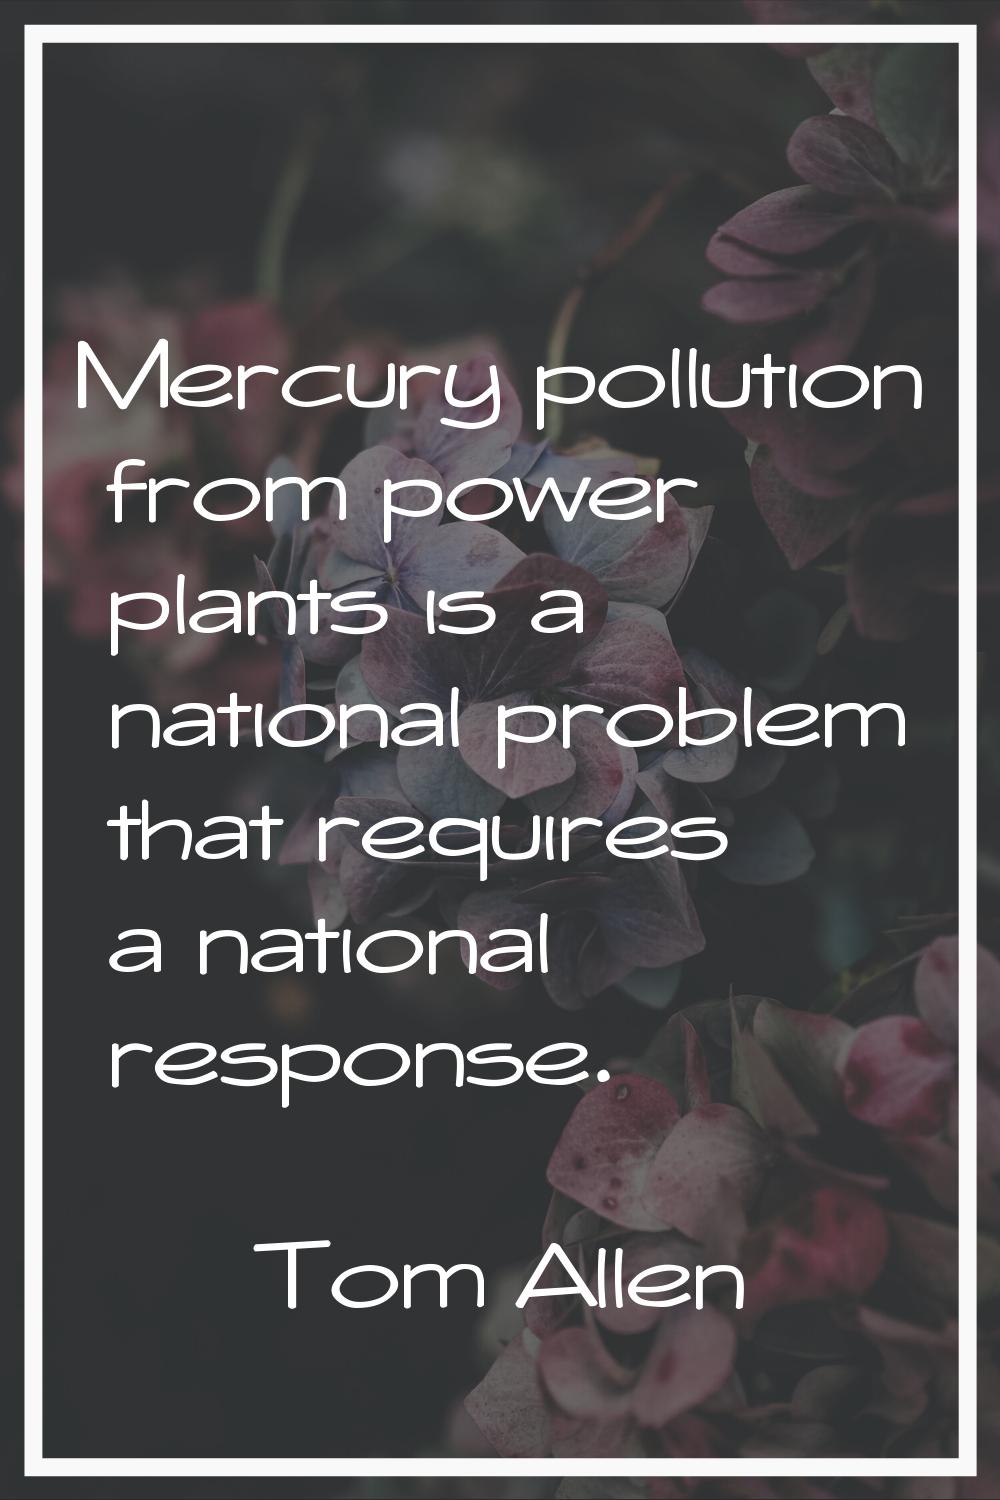 Mercury pollution from power plants is a national problem that requires a national response.